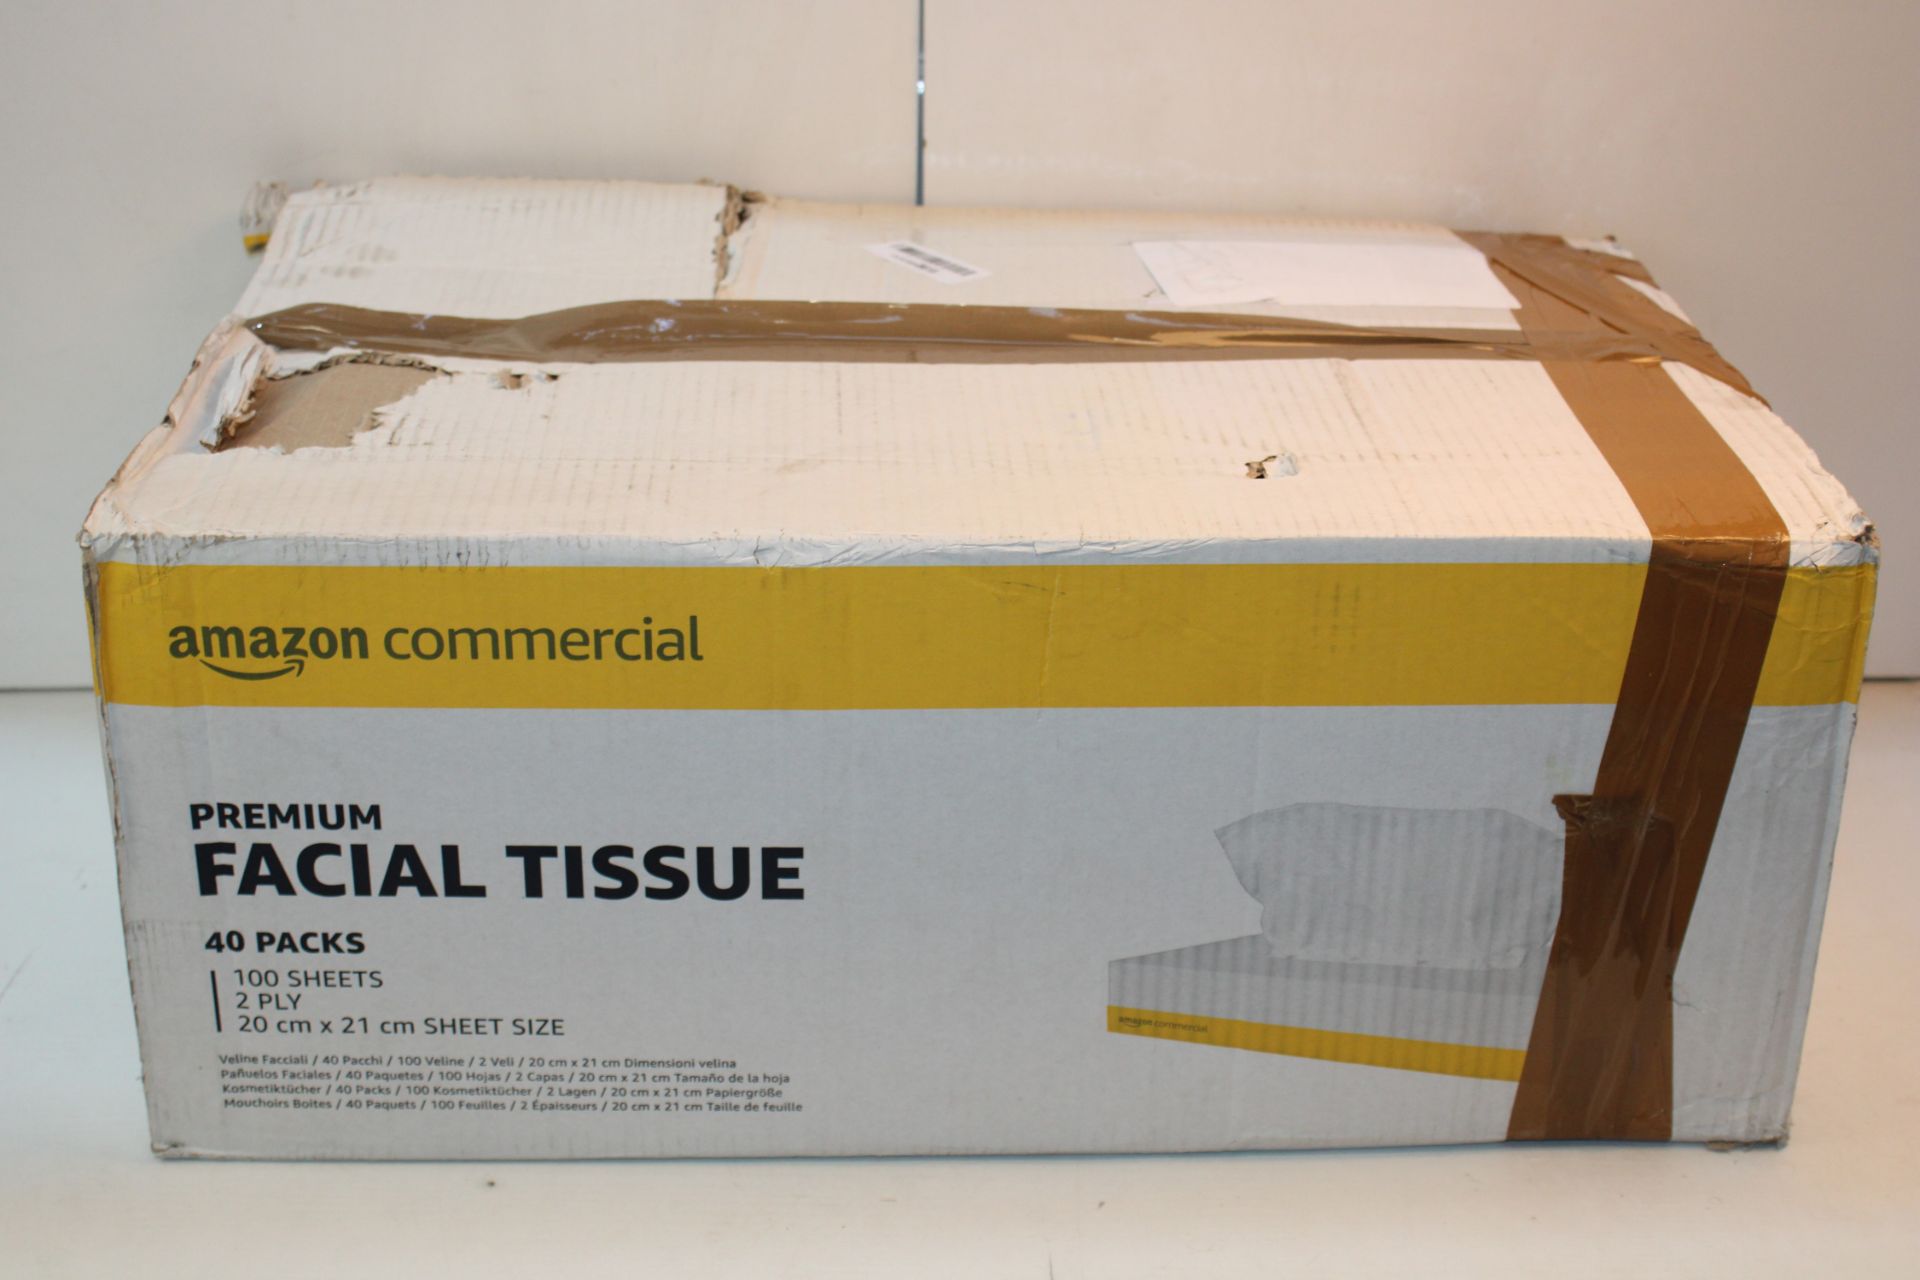 BOXED AMAZON COMMERCIAL PREMIUM FACIAL TISSUE Condition ReportAppraisal Available on Request- All